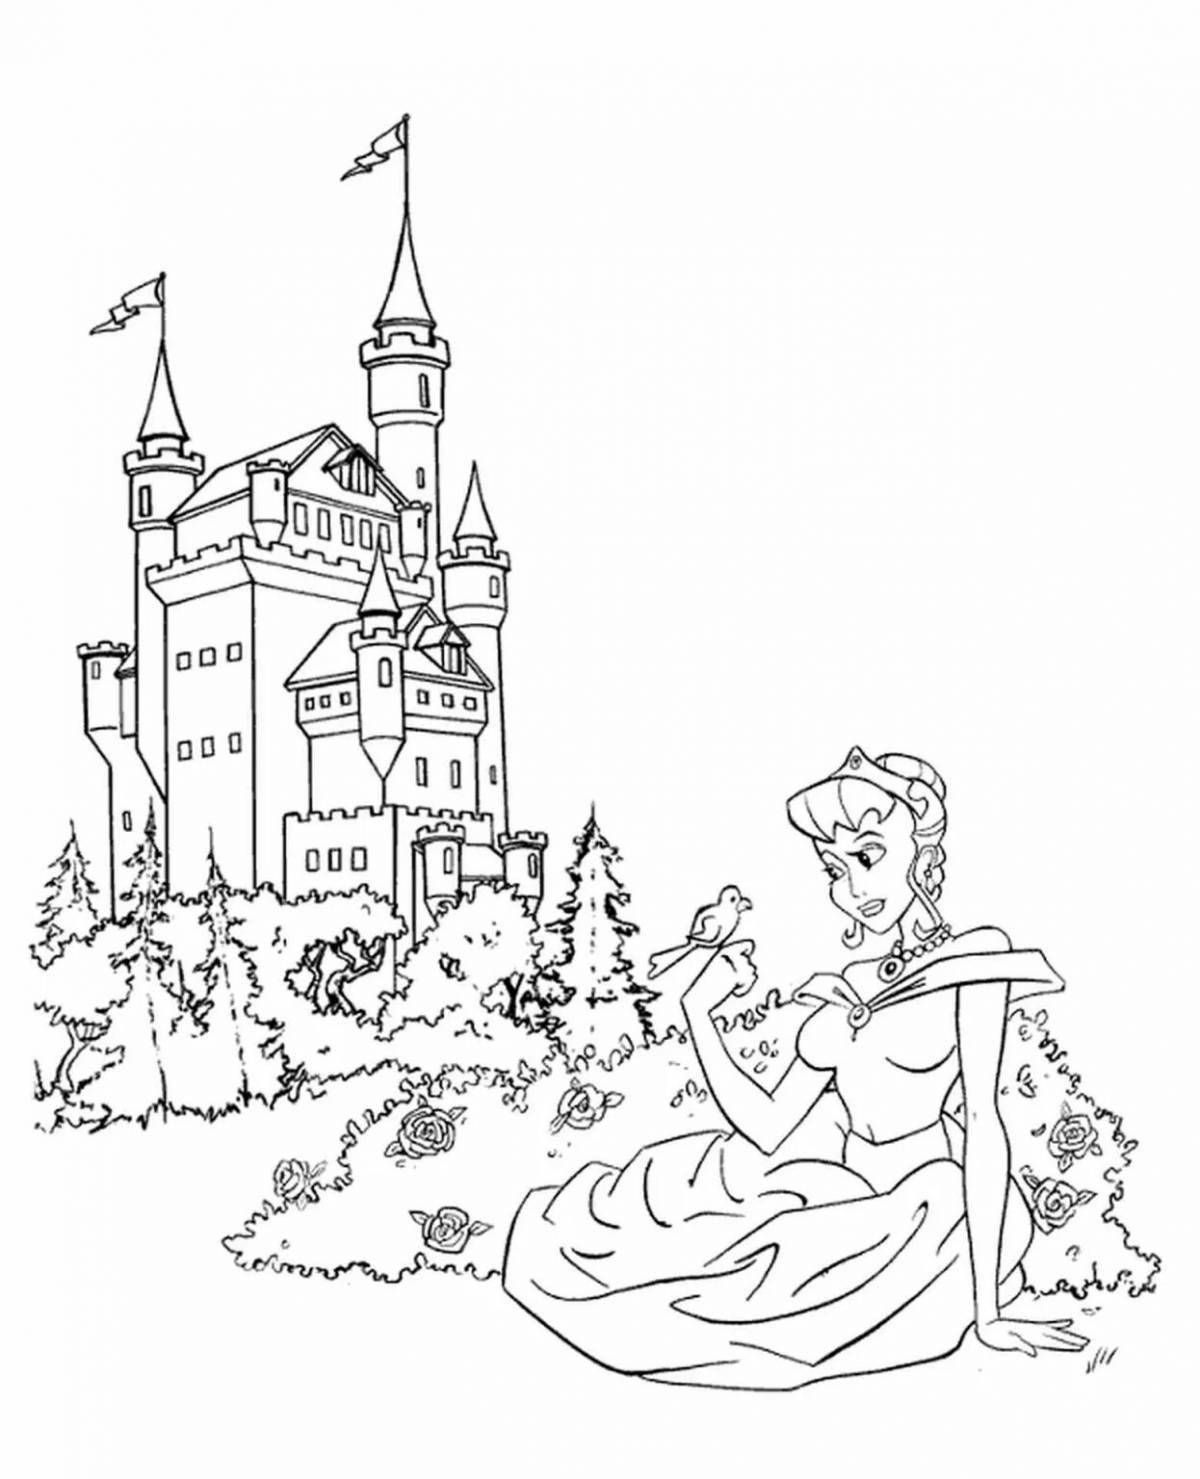 Colorful castles for girls coloring